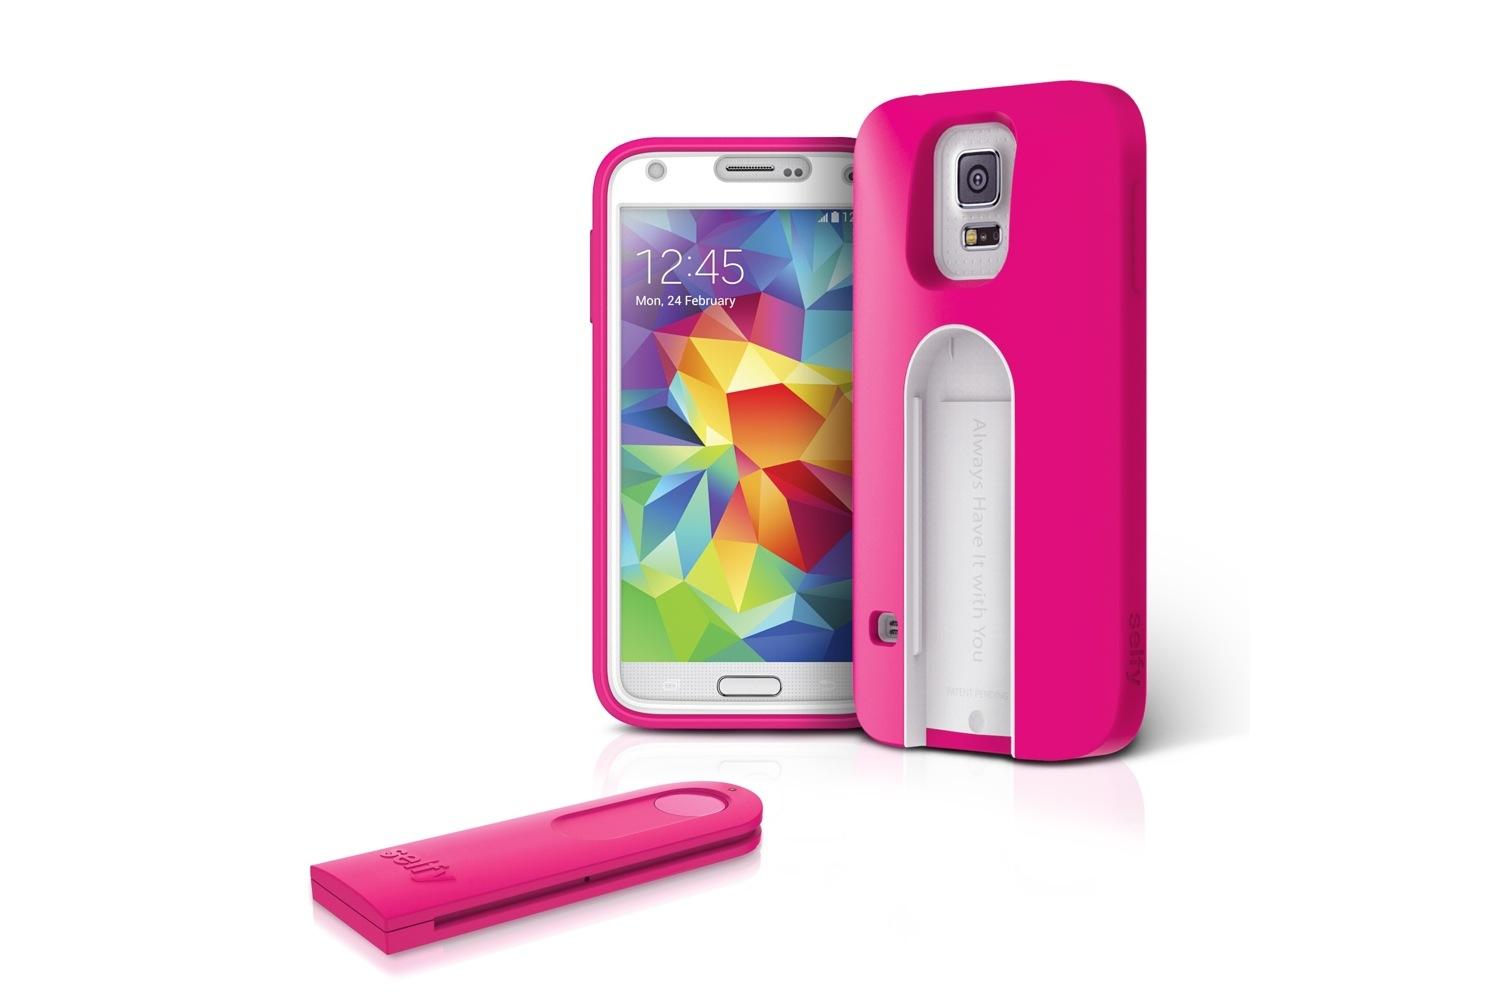 iluv smartphone case with built in remote shutter designed for the selfie obsessed selfy galaxy s5 pink